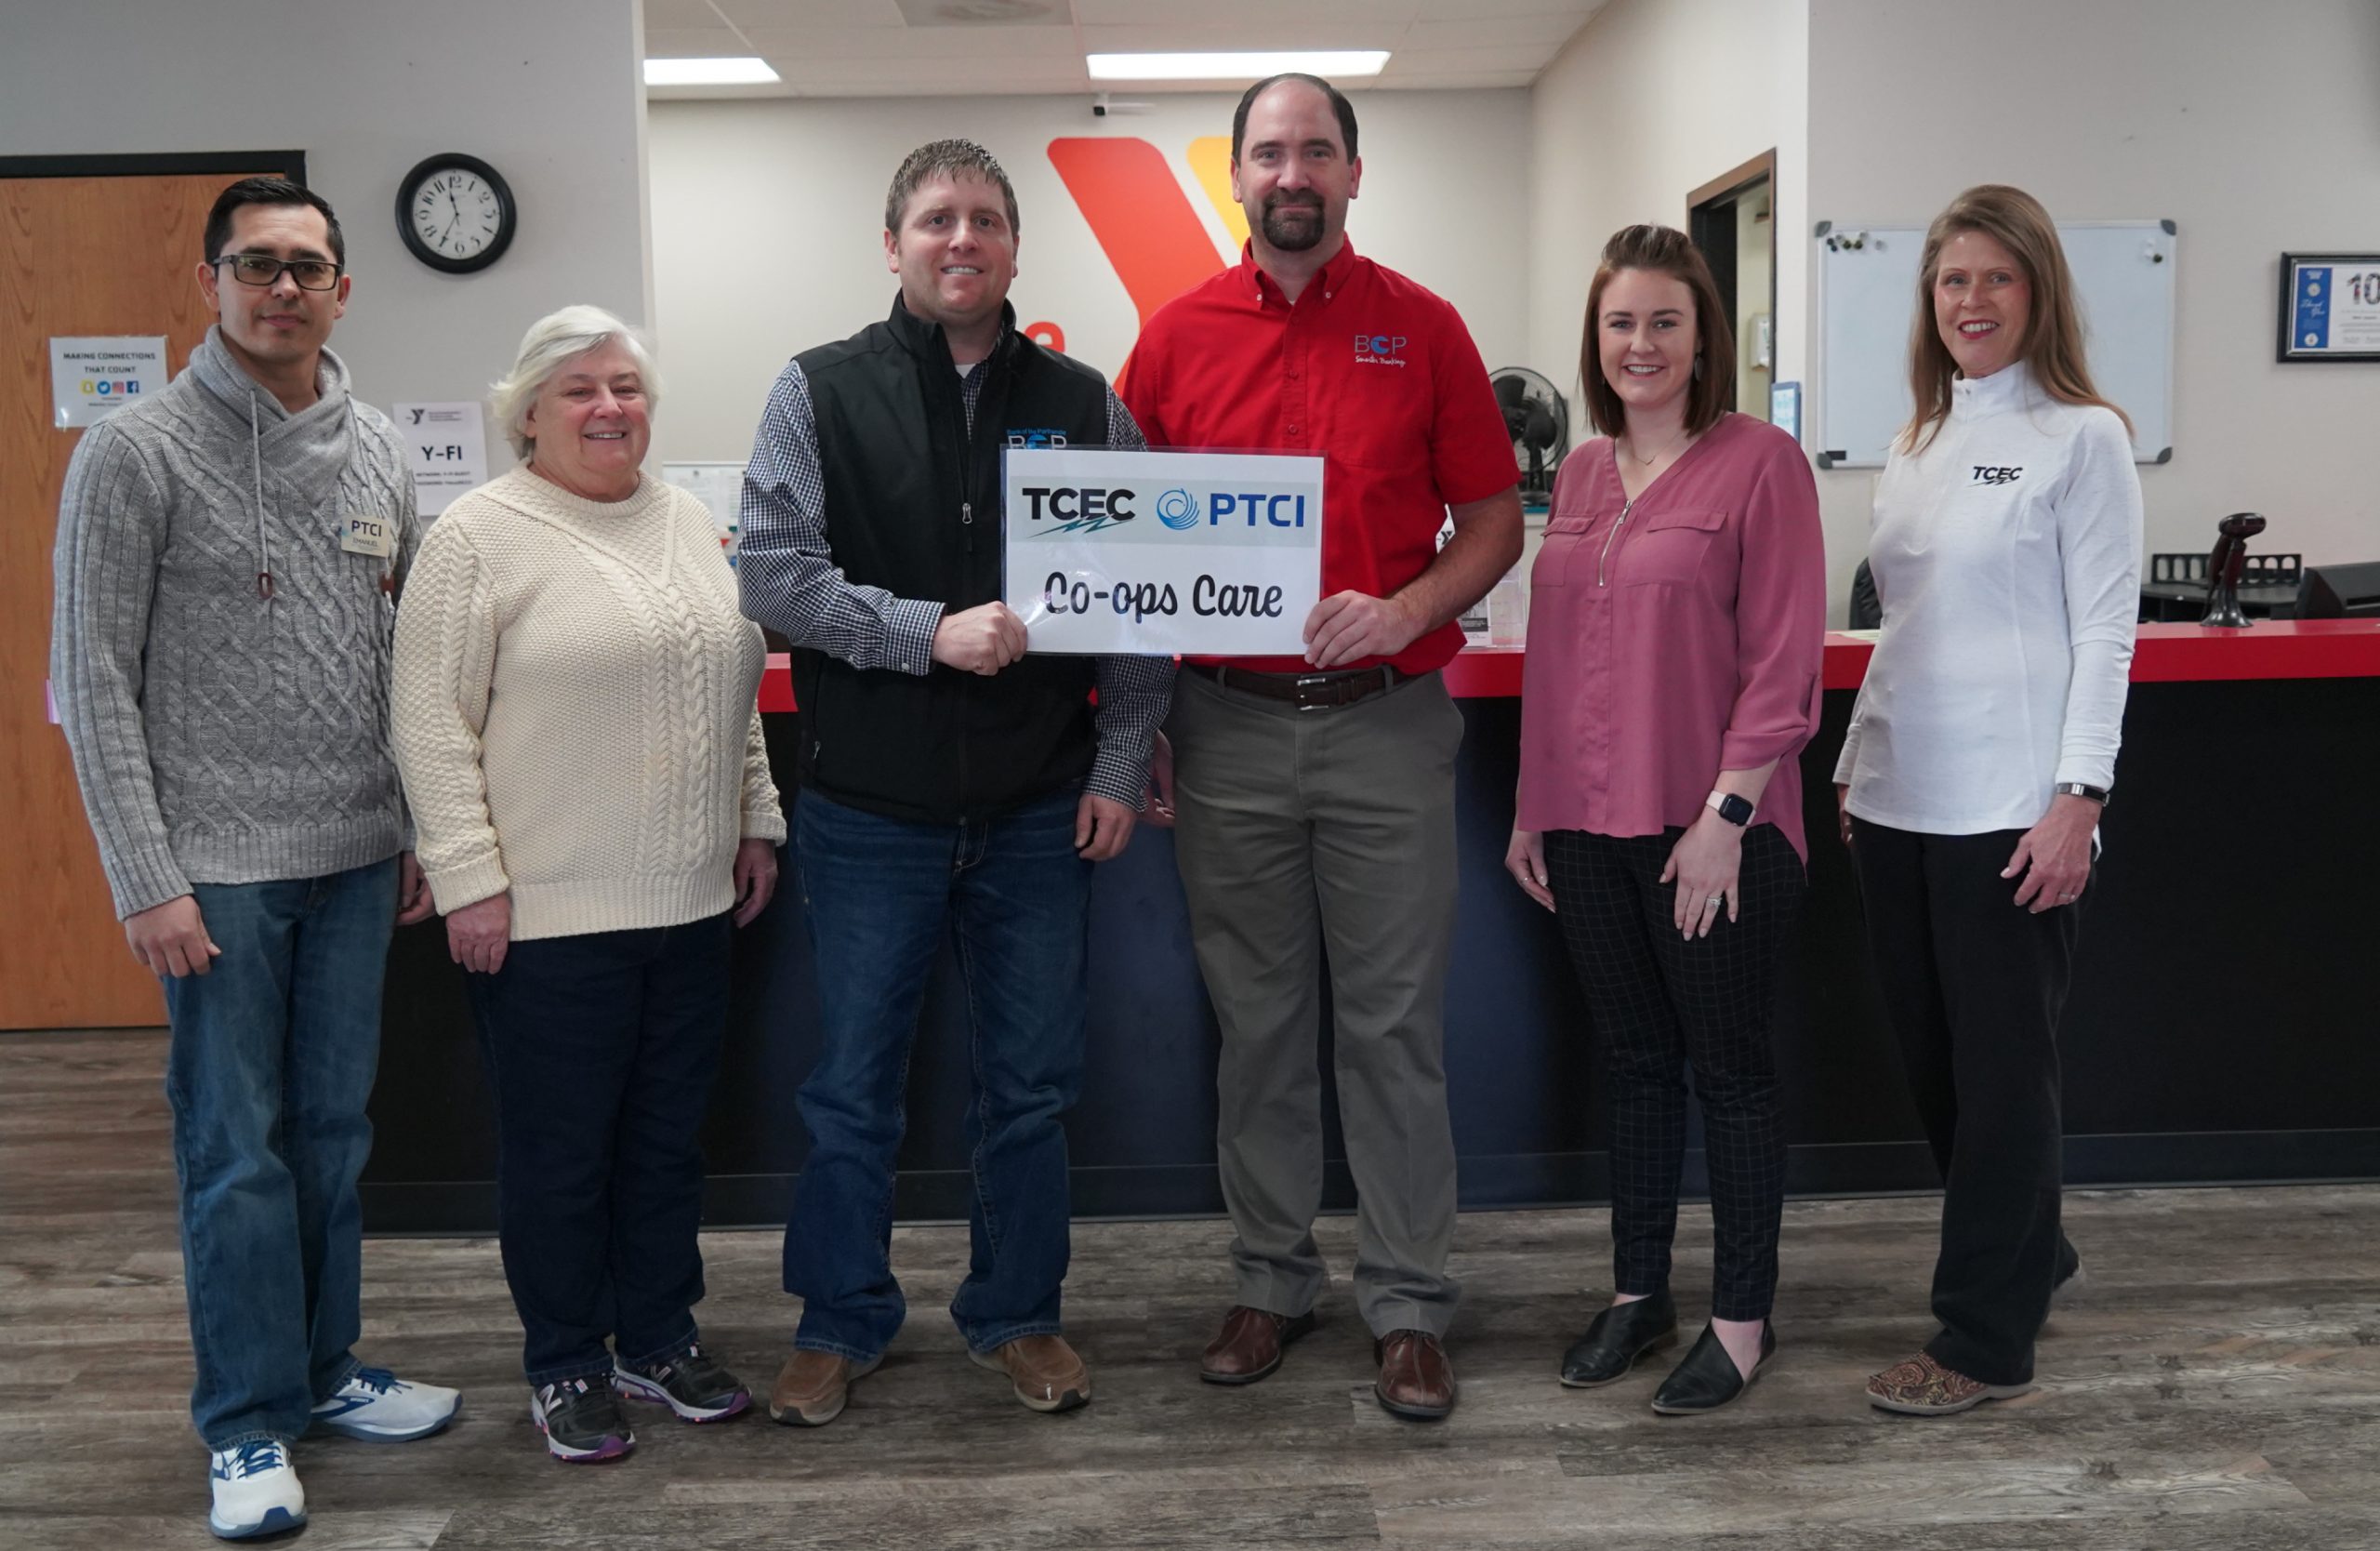 Co-ops Care: PTCI and TCEC come together to donate $5,000 to local Y